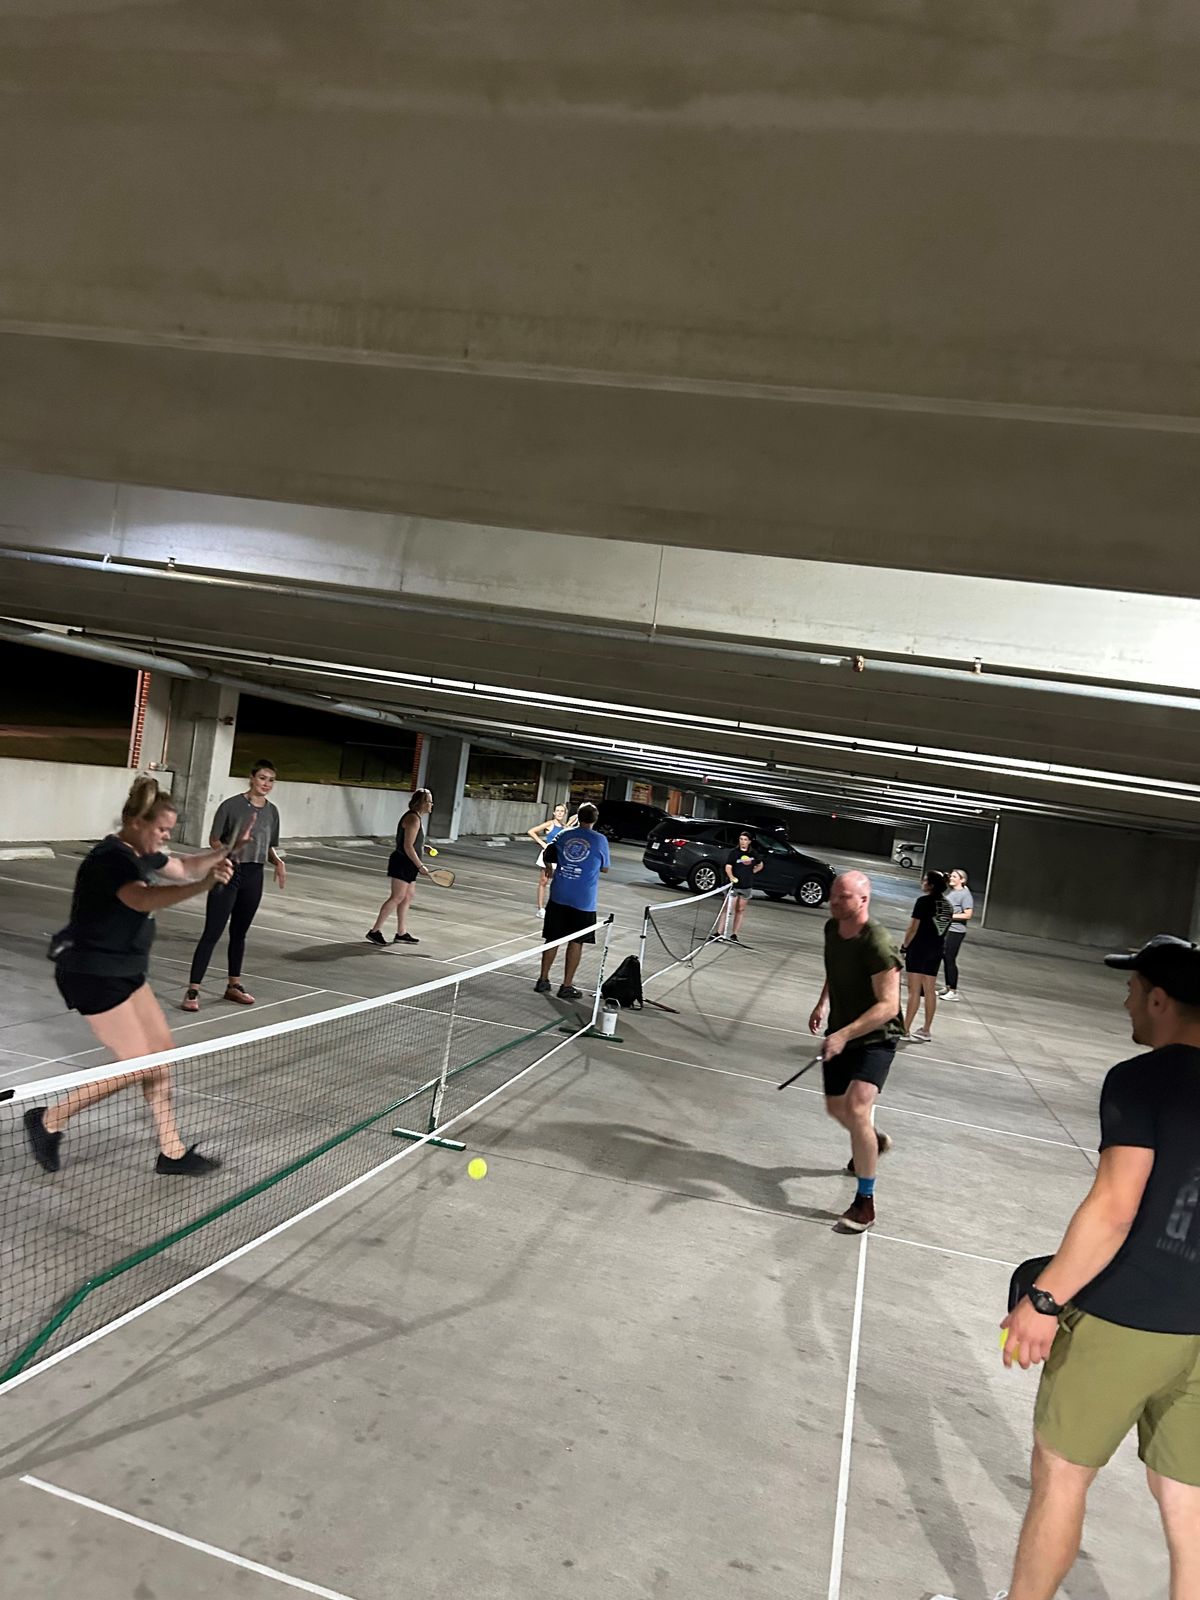 Overflow Of Sign Ups Results In Adding More Courts In Parking Garage For Beginners Clinic